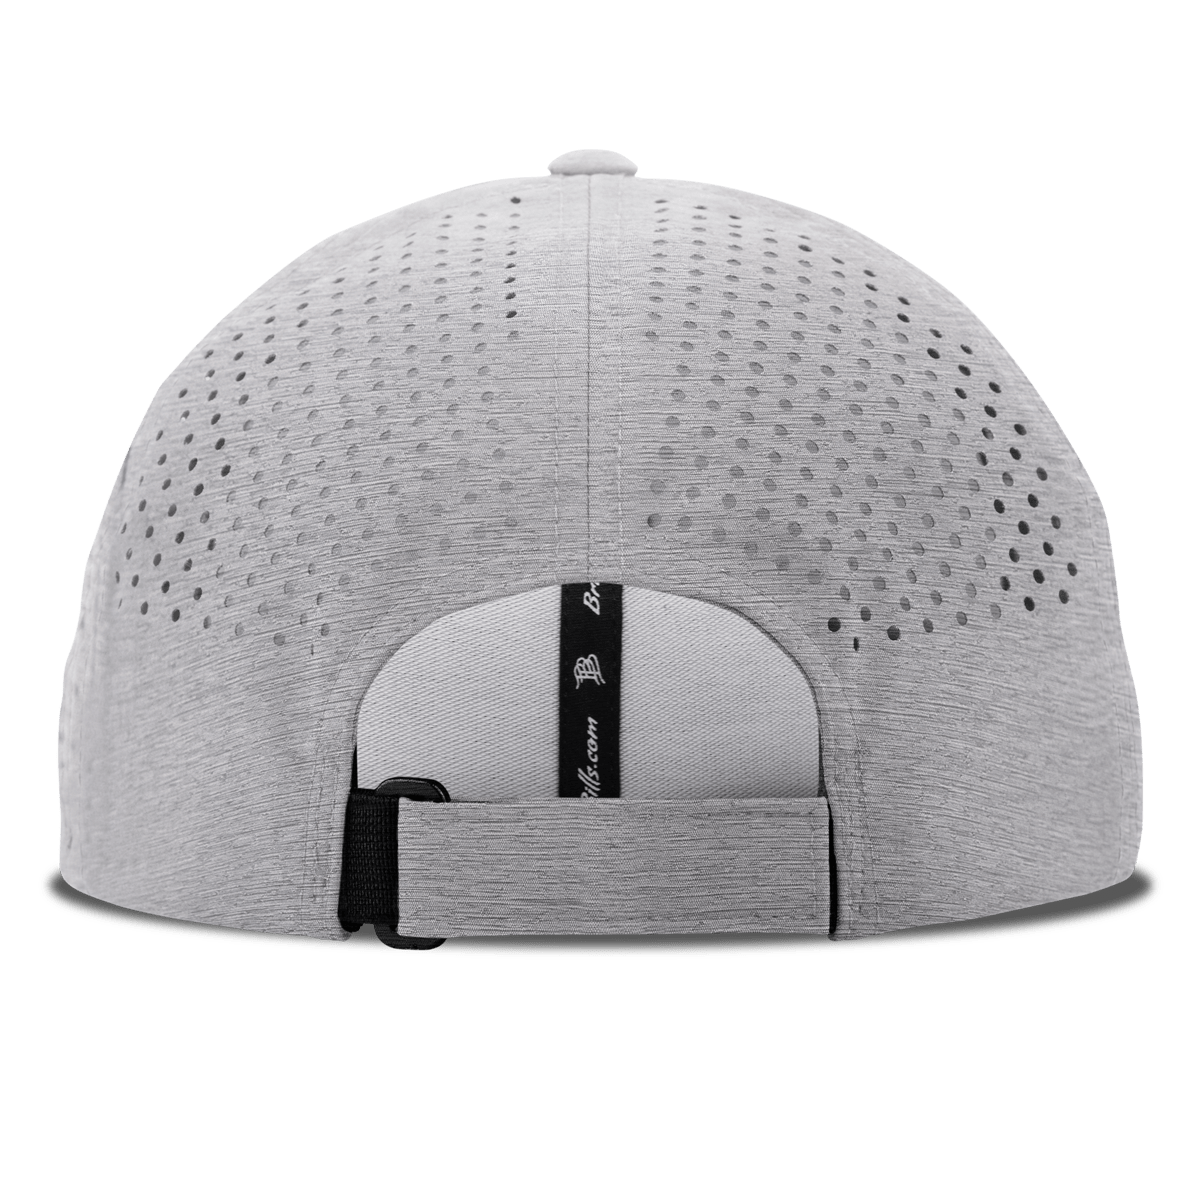 New Mexico 47 Curved Performance Back Heather Gray